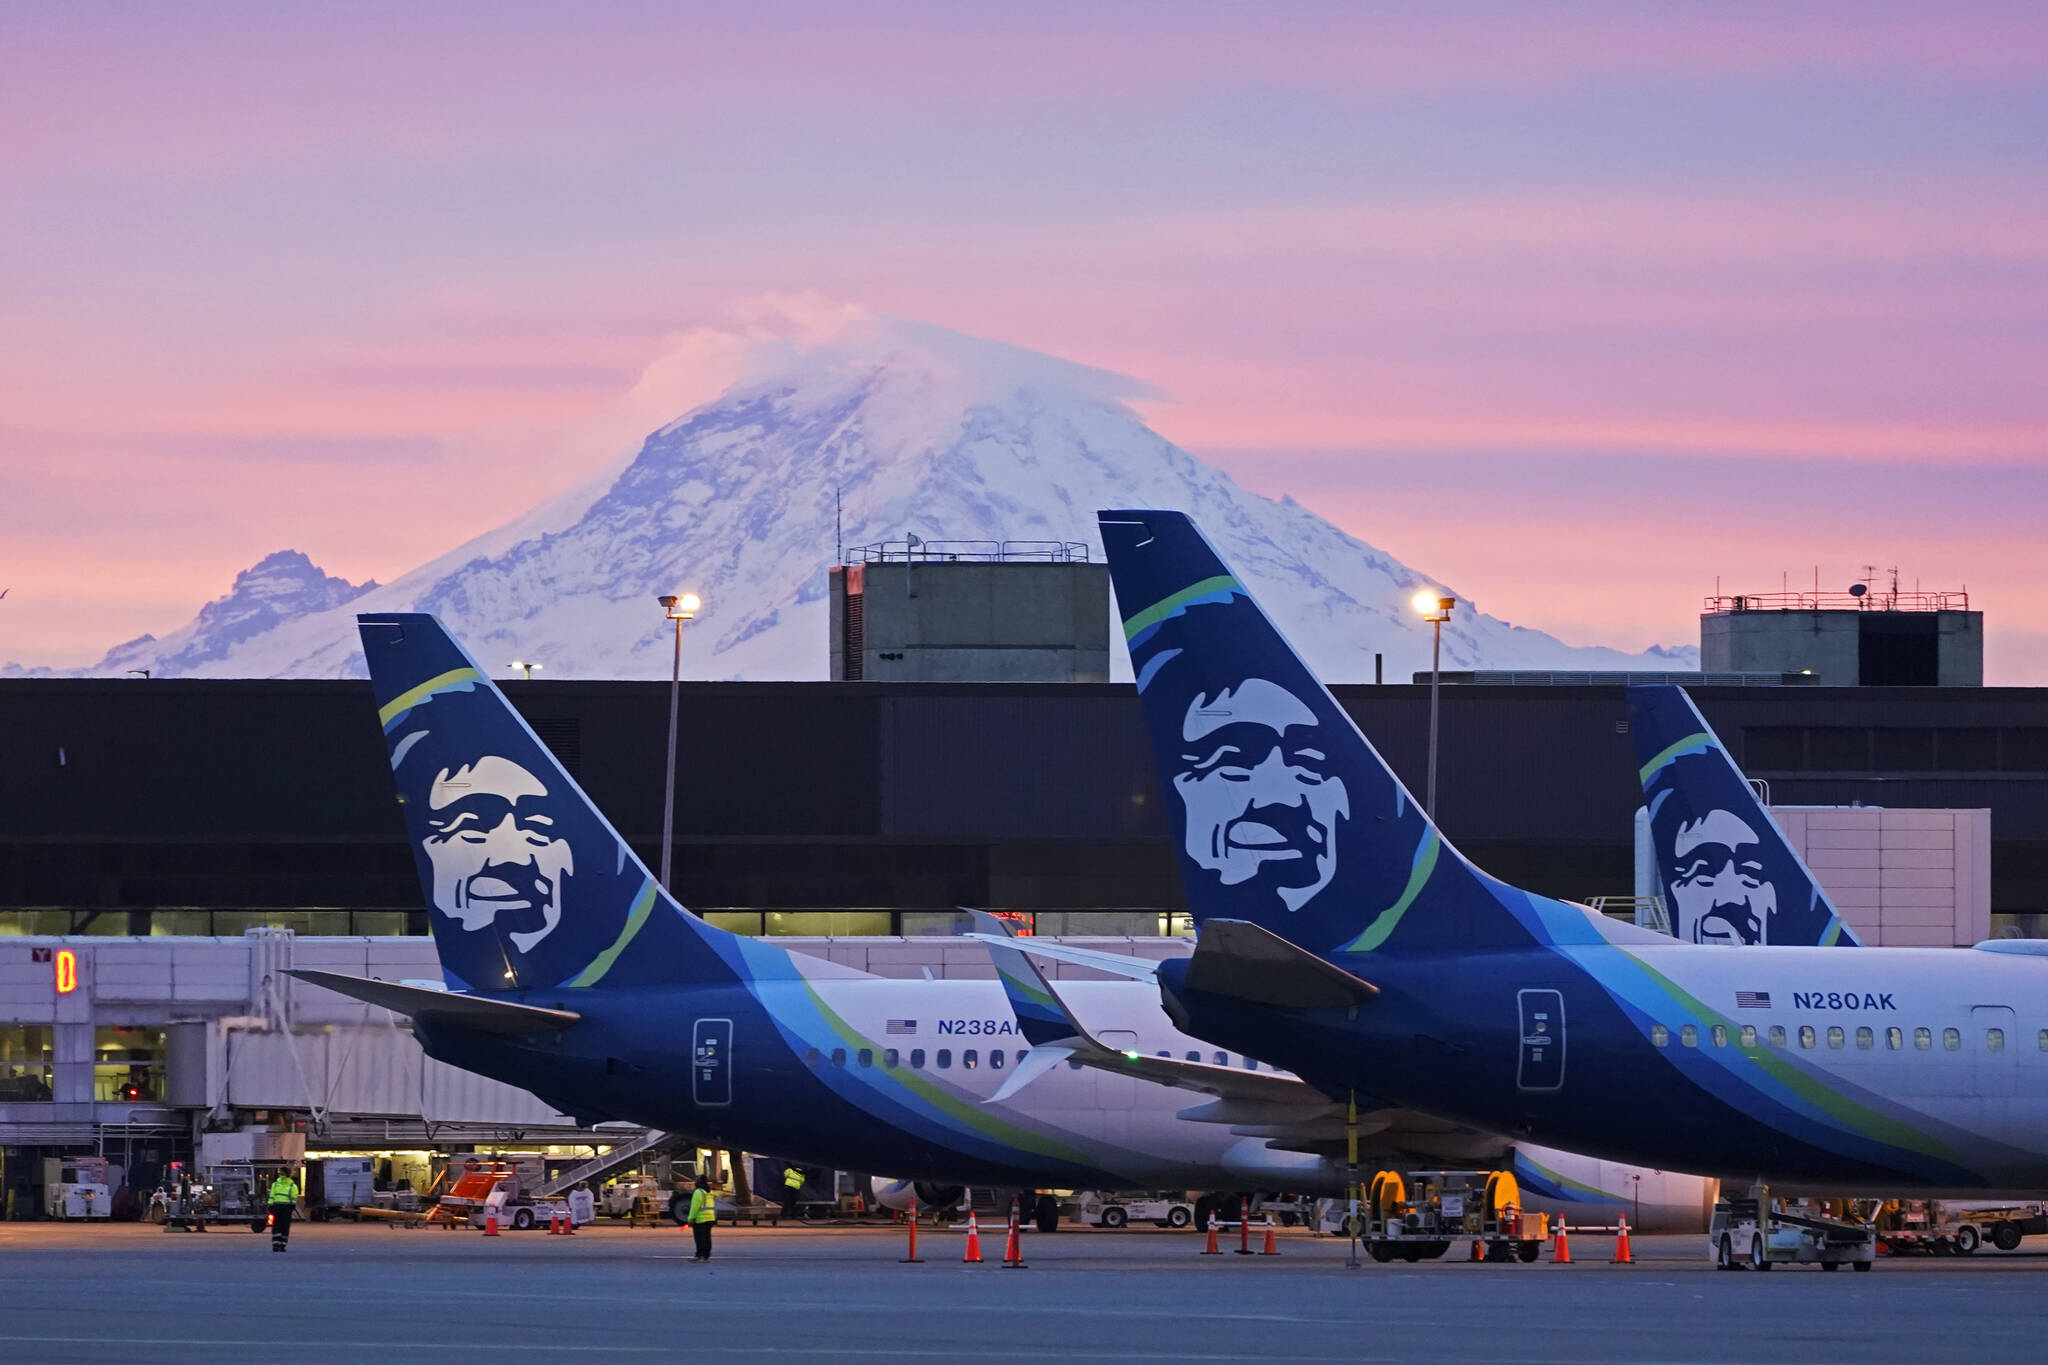 AP Photo / Ted S. Warren 
Alaska Airlines planes are shown parked at gates with Mount Rainier in the background at sunrise, at Seattle-Tacoma International Airport in Seattle. Alaska Air Group has told its 22,000 employees they will be required to get a COVID-19 vaccination. There are some exceptions to the policy, which has shifted since last month, the The Seattle Times reported. In an email Thursday evening to all Alaska Airlines and Horizon Air employees, the Seattle-based company said employees will now be required to be fully vaccinated or approved for a reasonable accommodation.